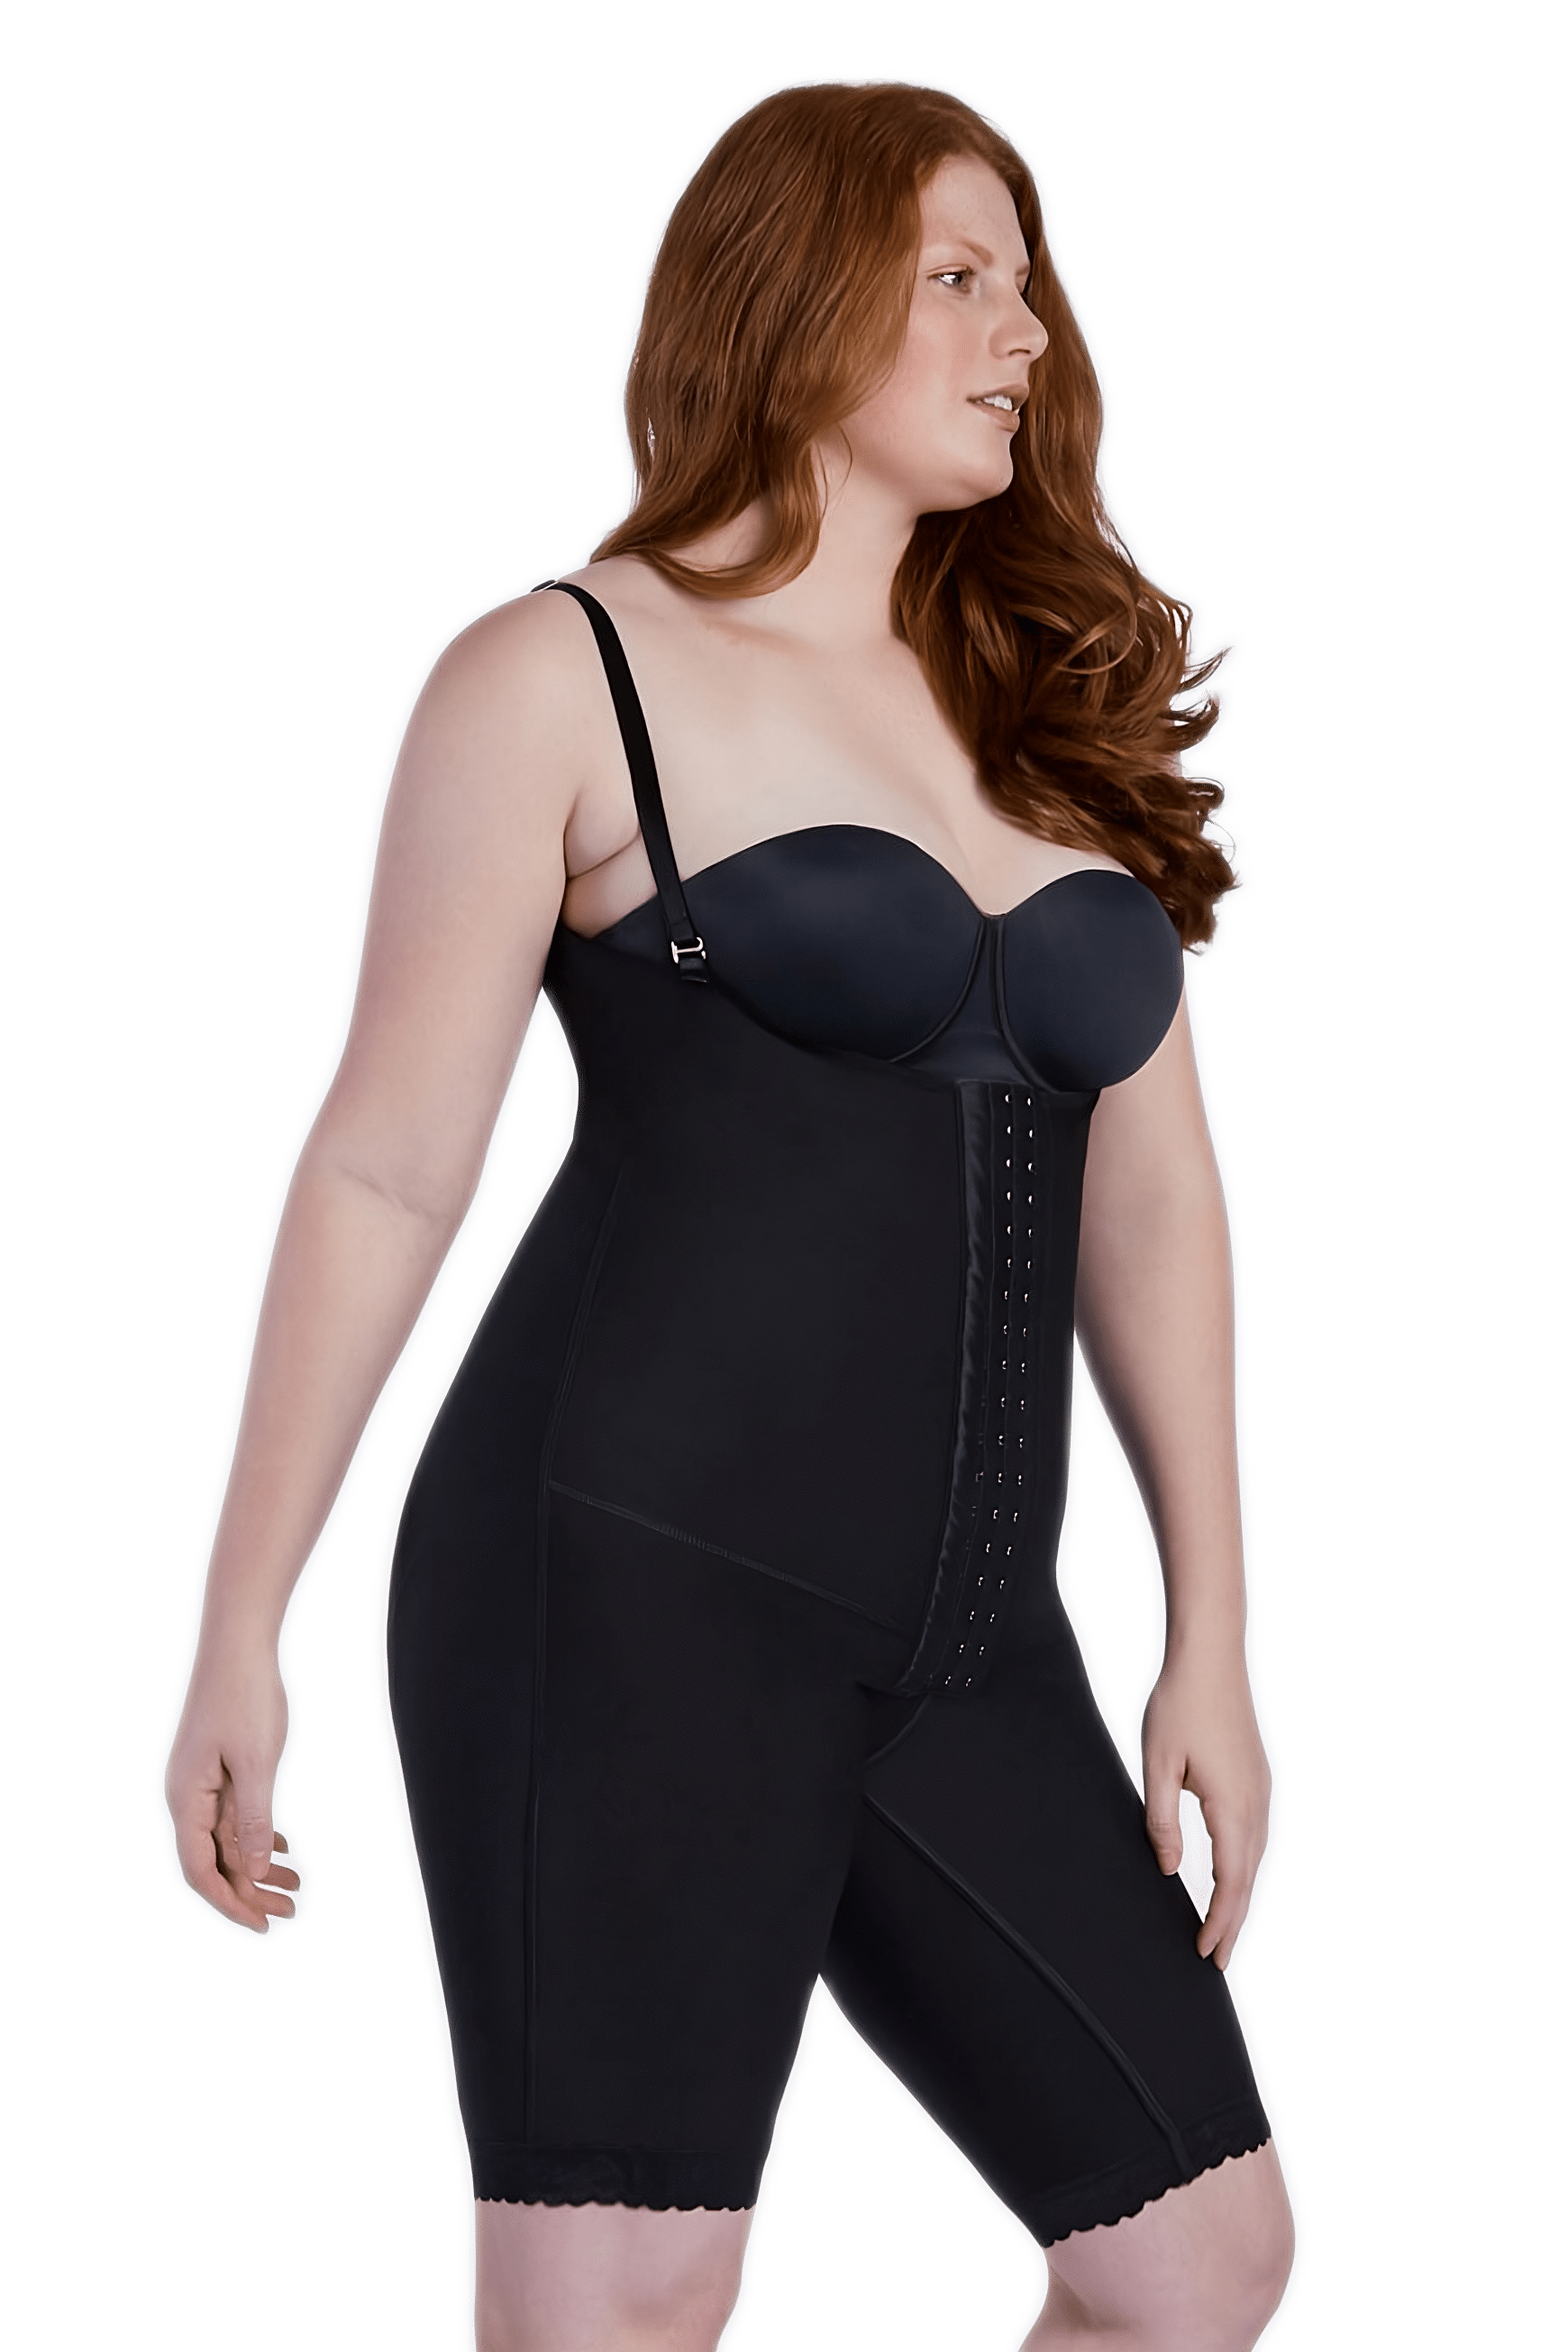 Ily Clothing Shapwear Post Surgical Full Body Shaper